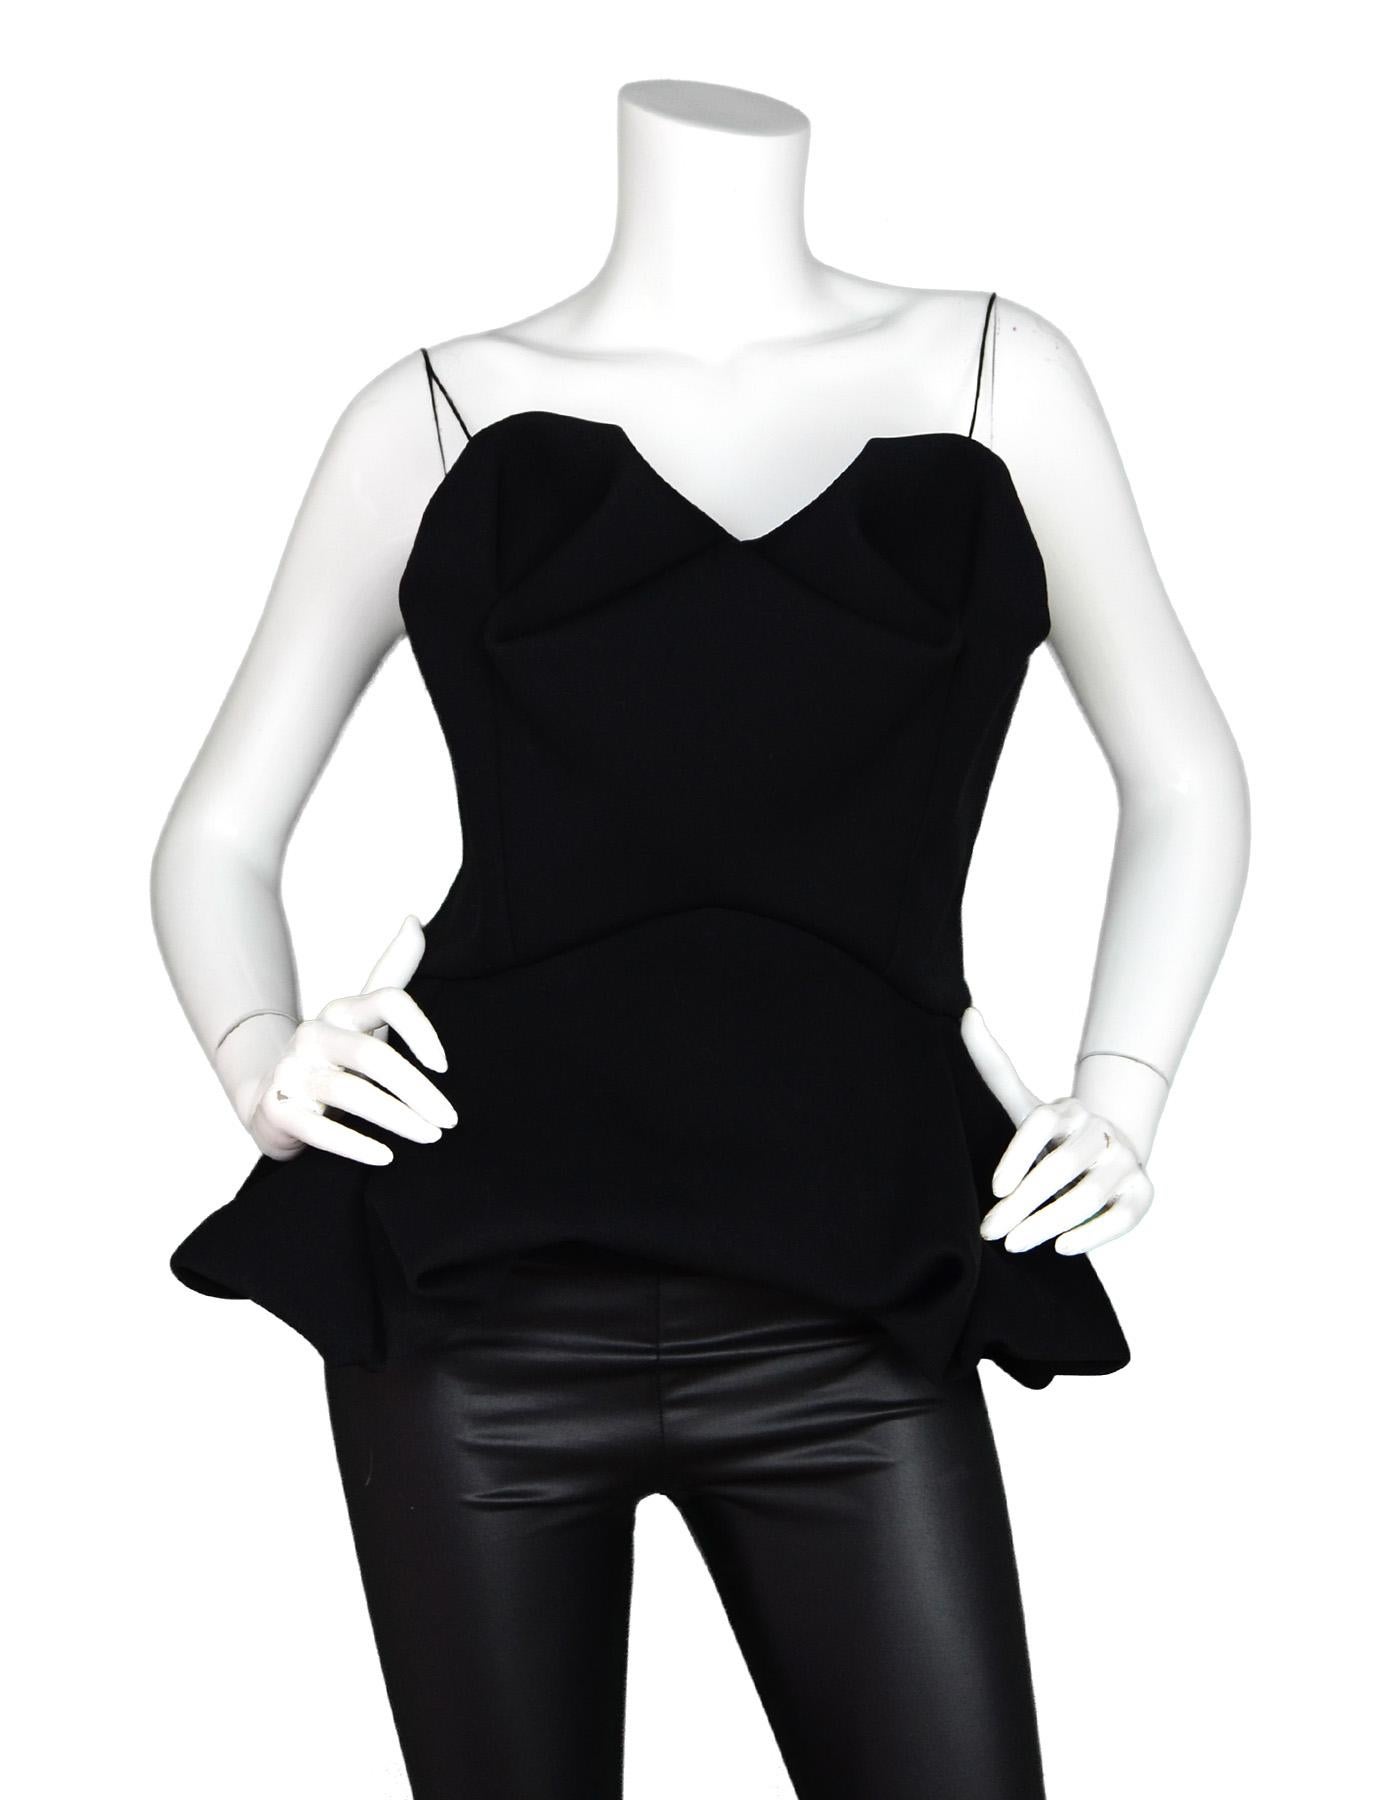 Chalayan Black Strapless Peplum Top NWT Sz IT 46

Made In: Italy
Color: Black
Materials: 80% acetate, 20% polyamide 
Lining: 100% polyester
Opening/Closure: Full back zipper
Overall Condition: New with tags condition 
Includes: Original